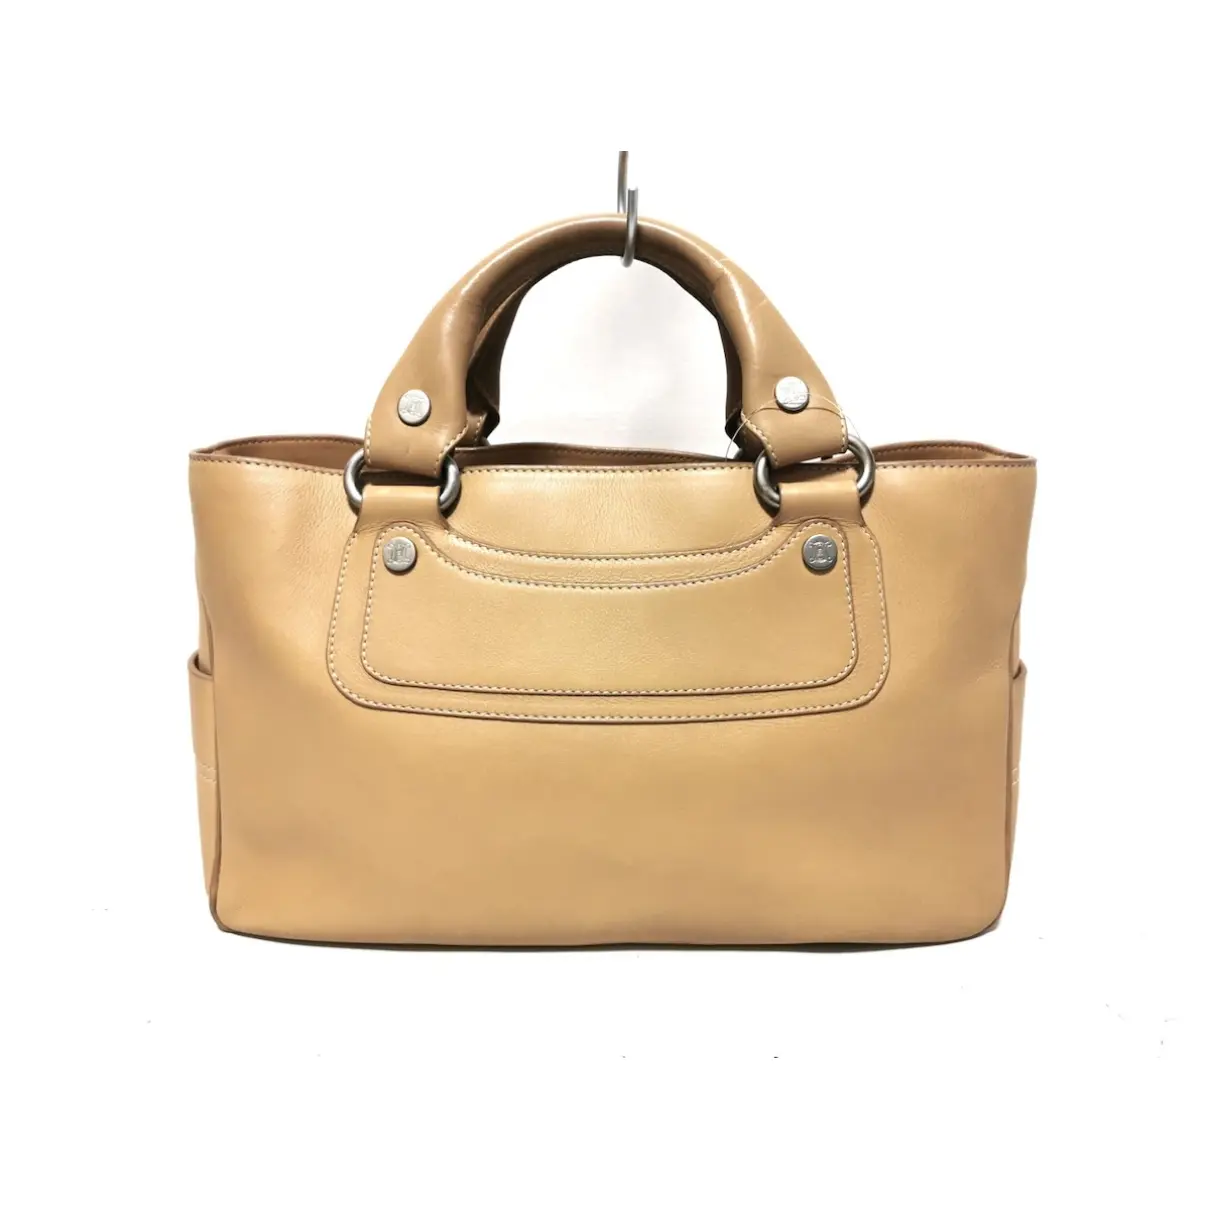 Boogie leather tote Celine